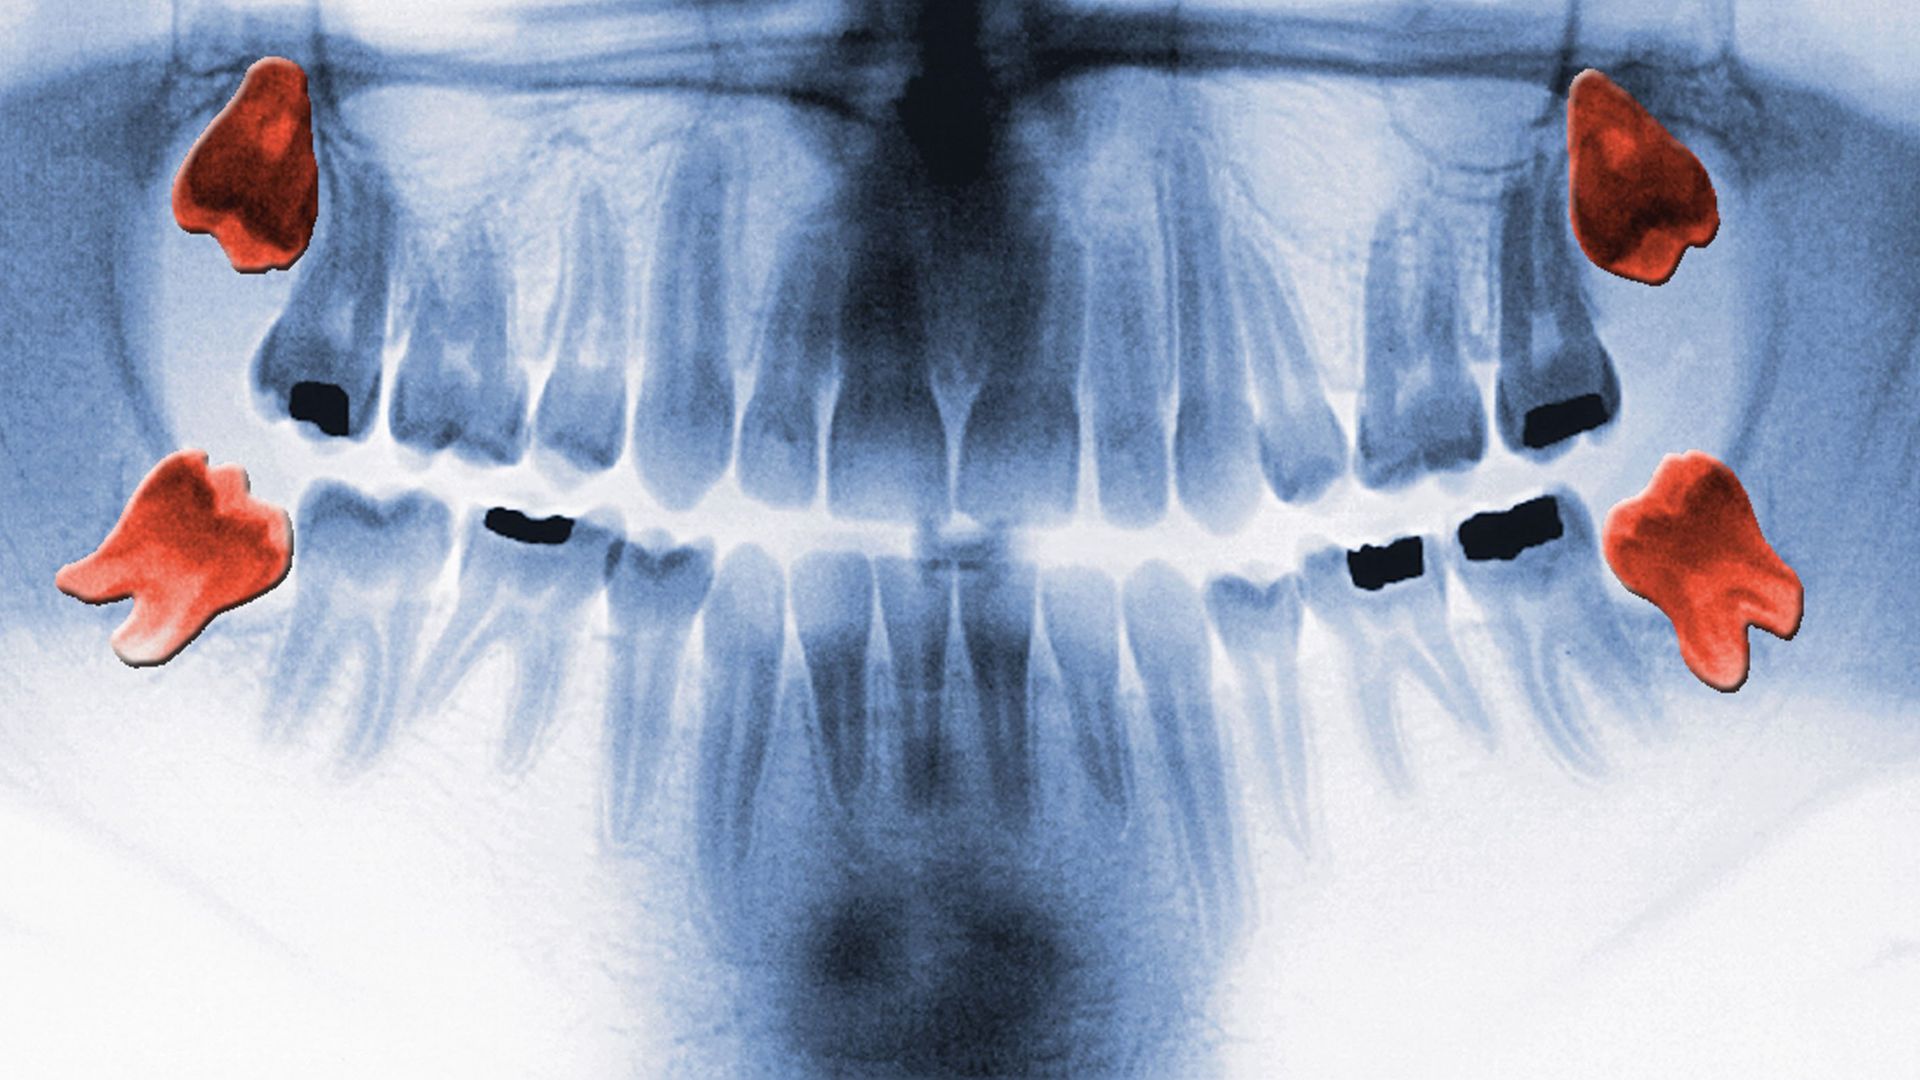 mouth x-ray with wisdom teeth highlighted in red